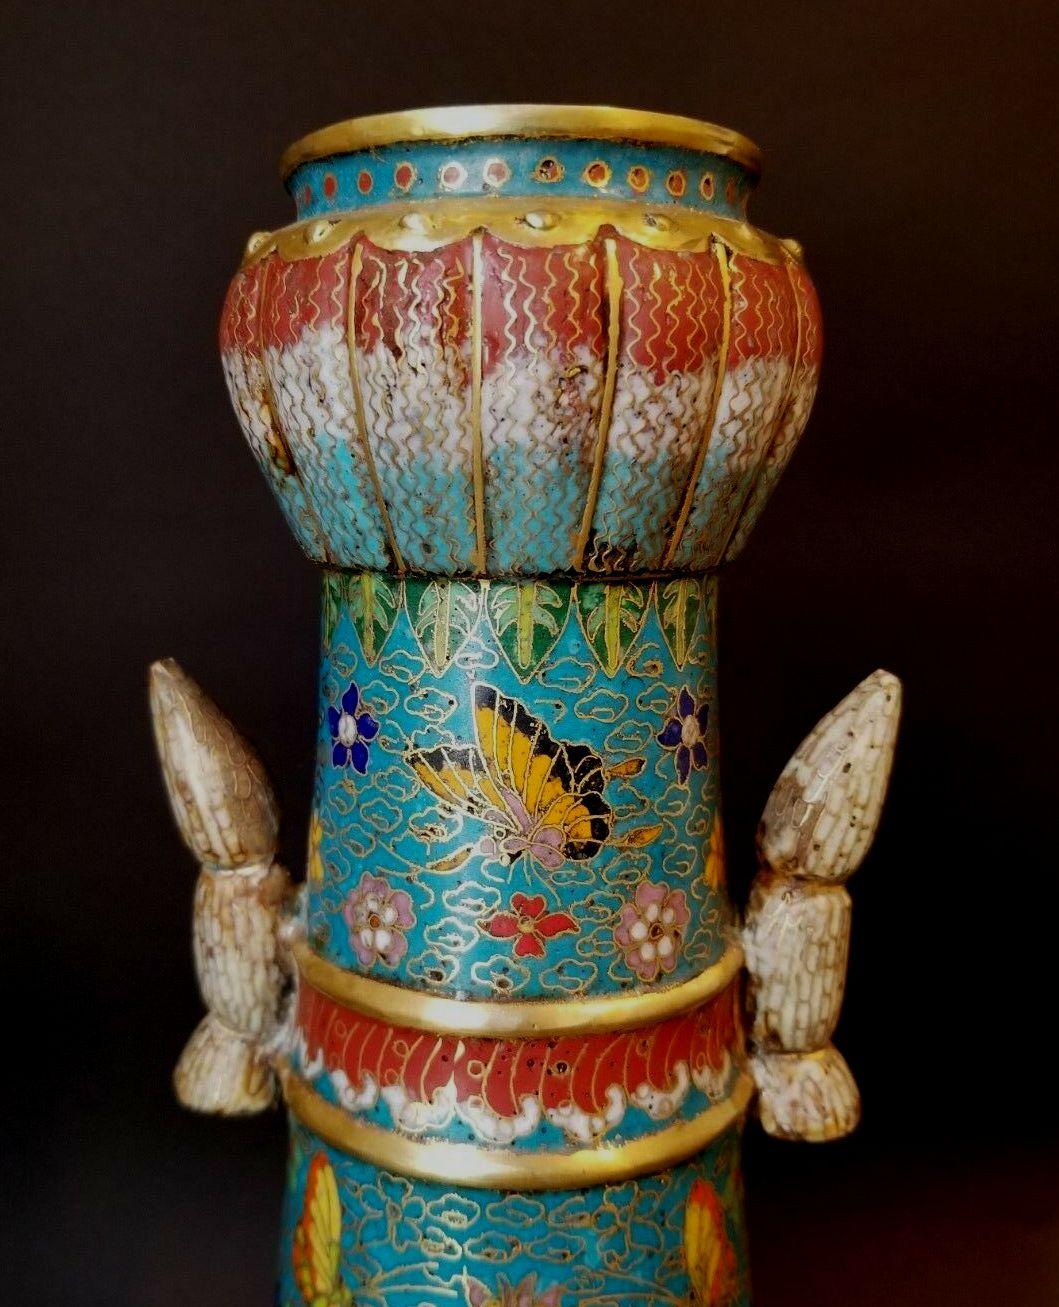 A large and impressive Chinese cloisonné enamel bottle-shaped vase. Featuring a floral and butterfly design and with lotus reliefs and handles. Incised mark at base. A Heavy piece and signed on the bottom.